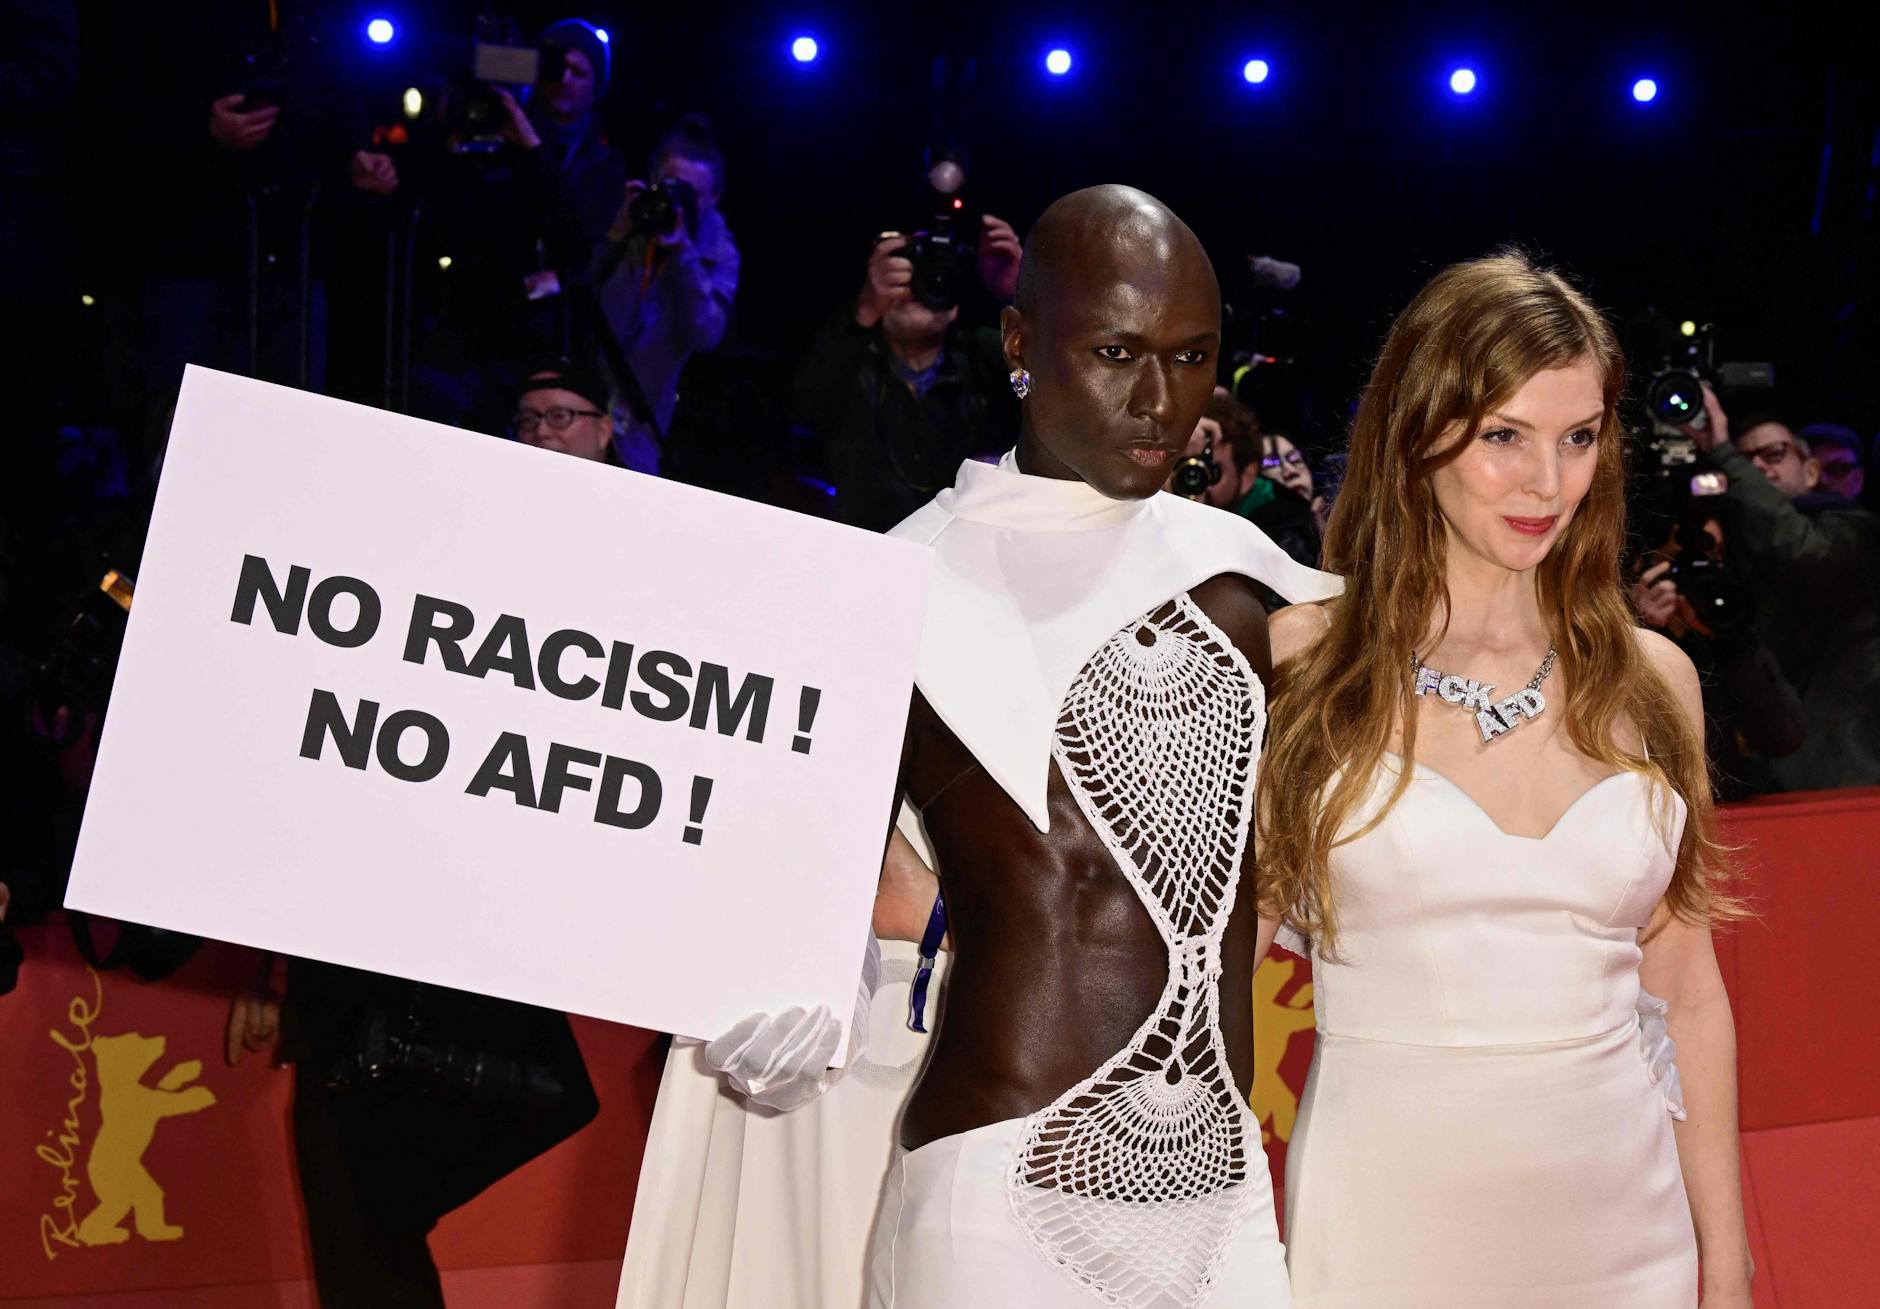 The protest against the AfD cannot be overlooked in the evening: the Senegalese model Papis Loveday and actress Pheline Roggan take a stand with this sign.